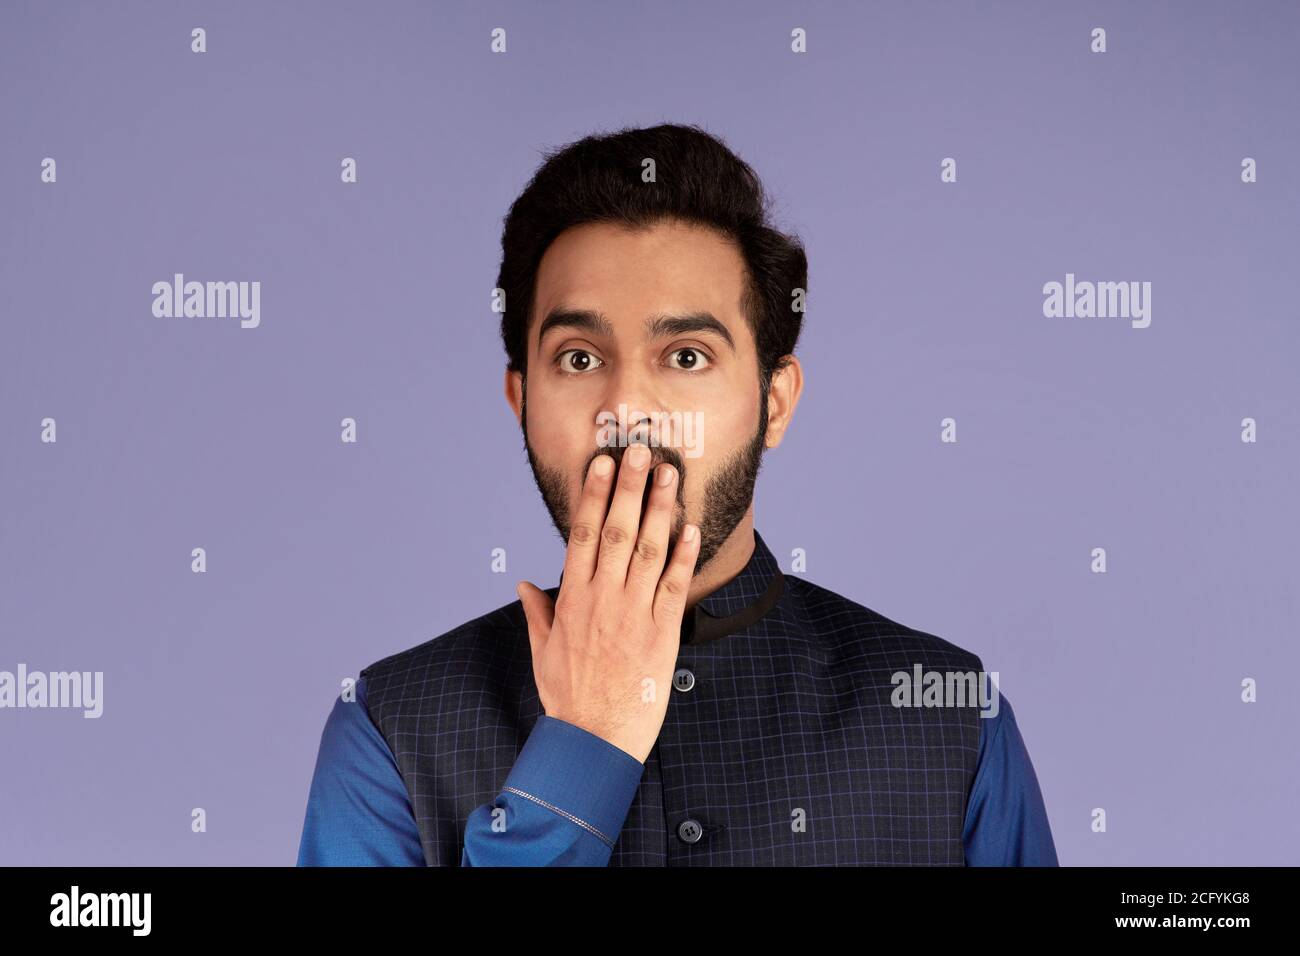 Silence or mistake concept. Shocked Indian man covering mouth with his hand over lilac background Stock Photo